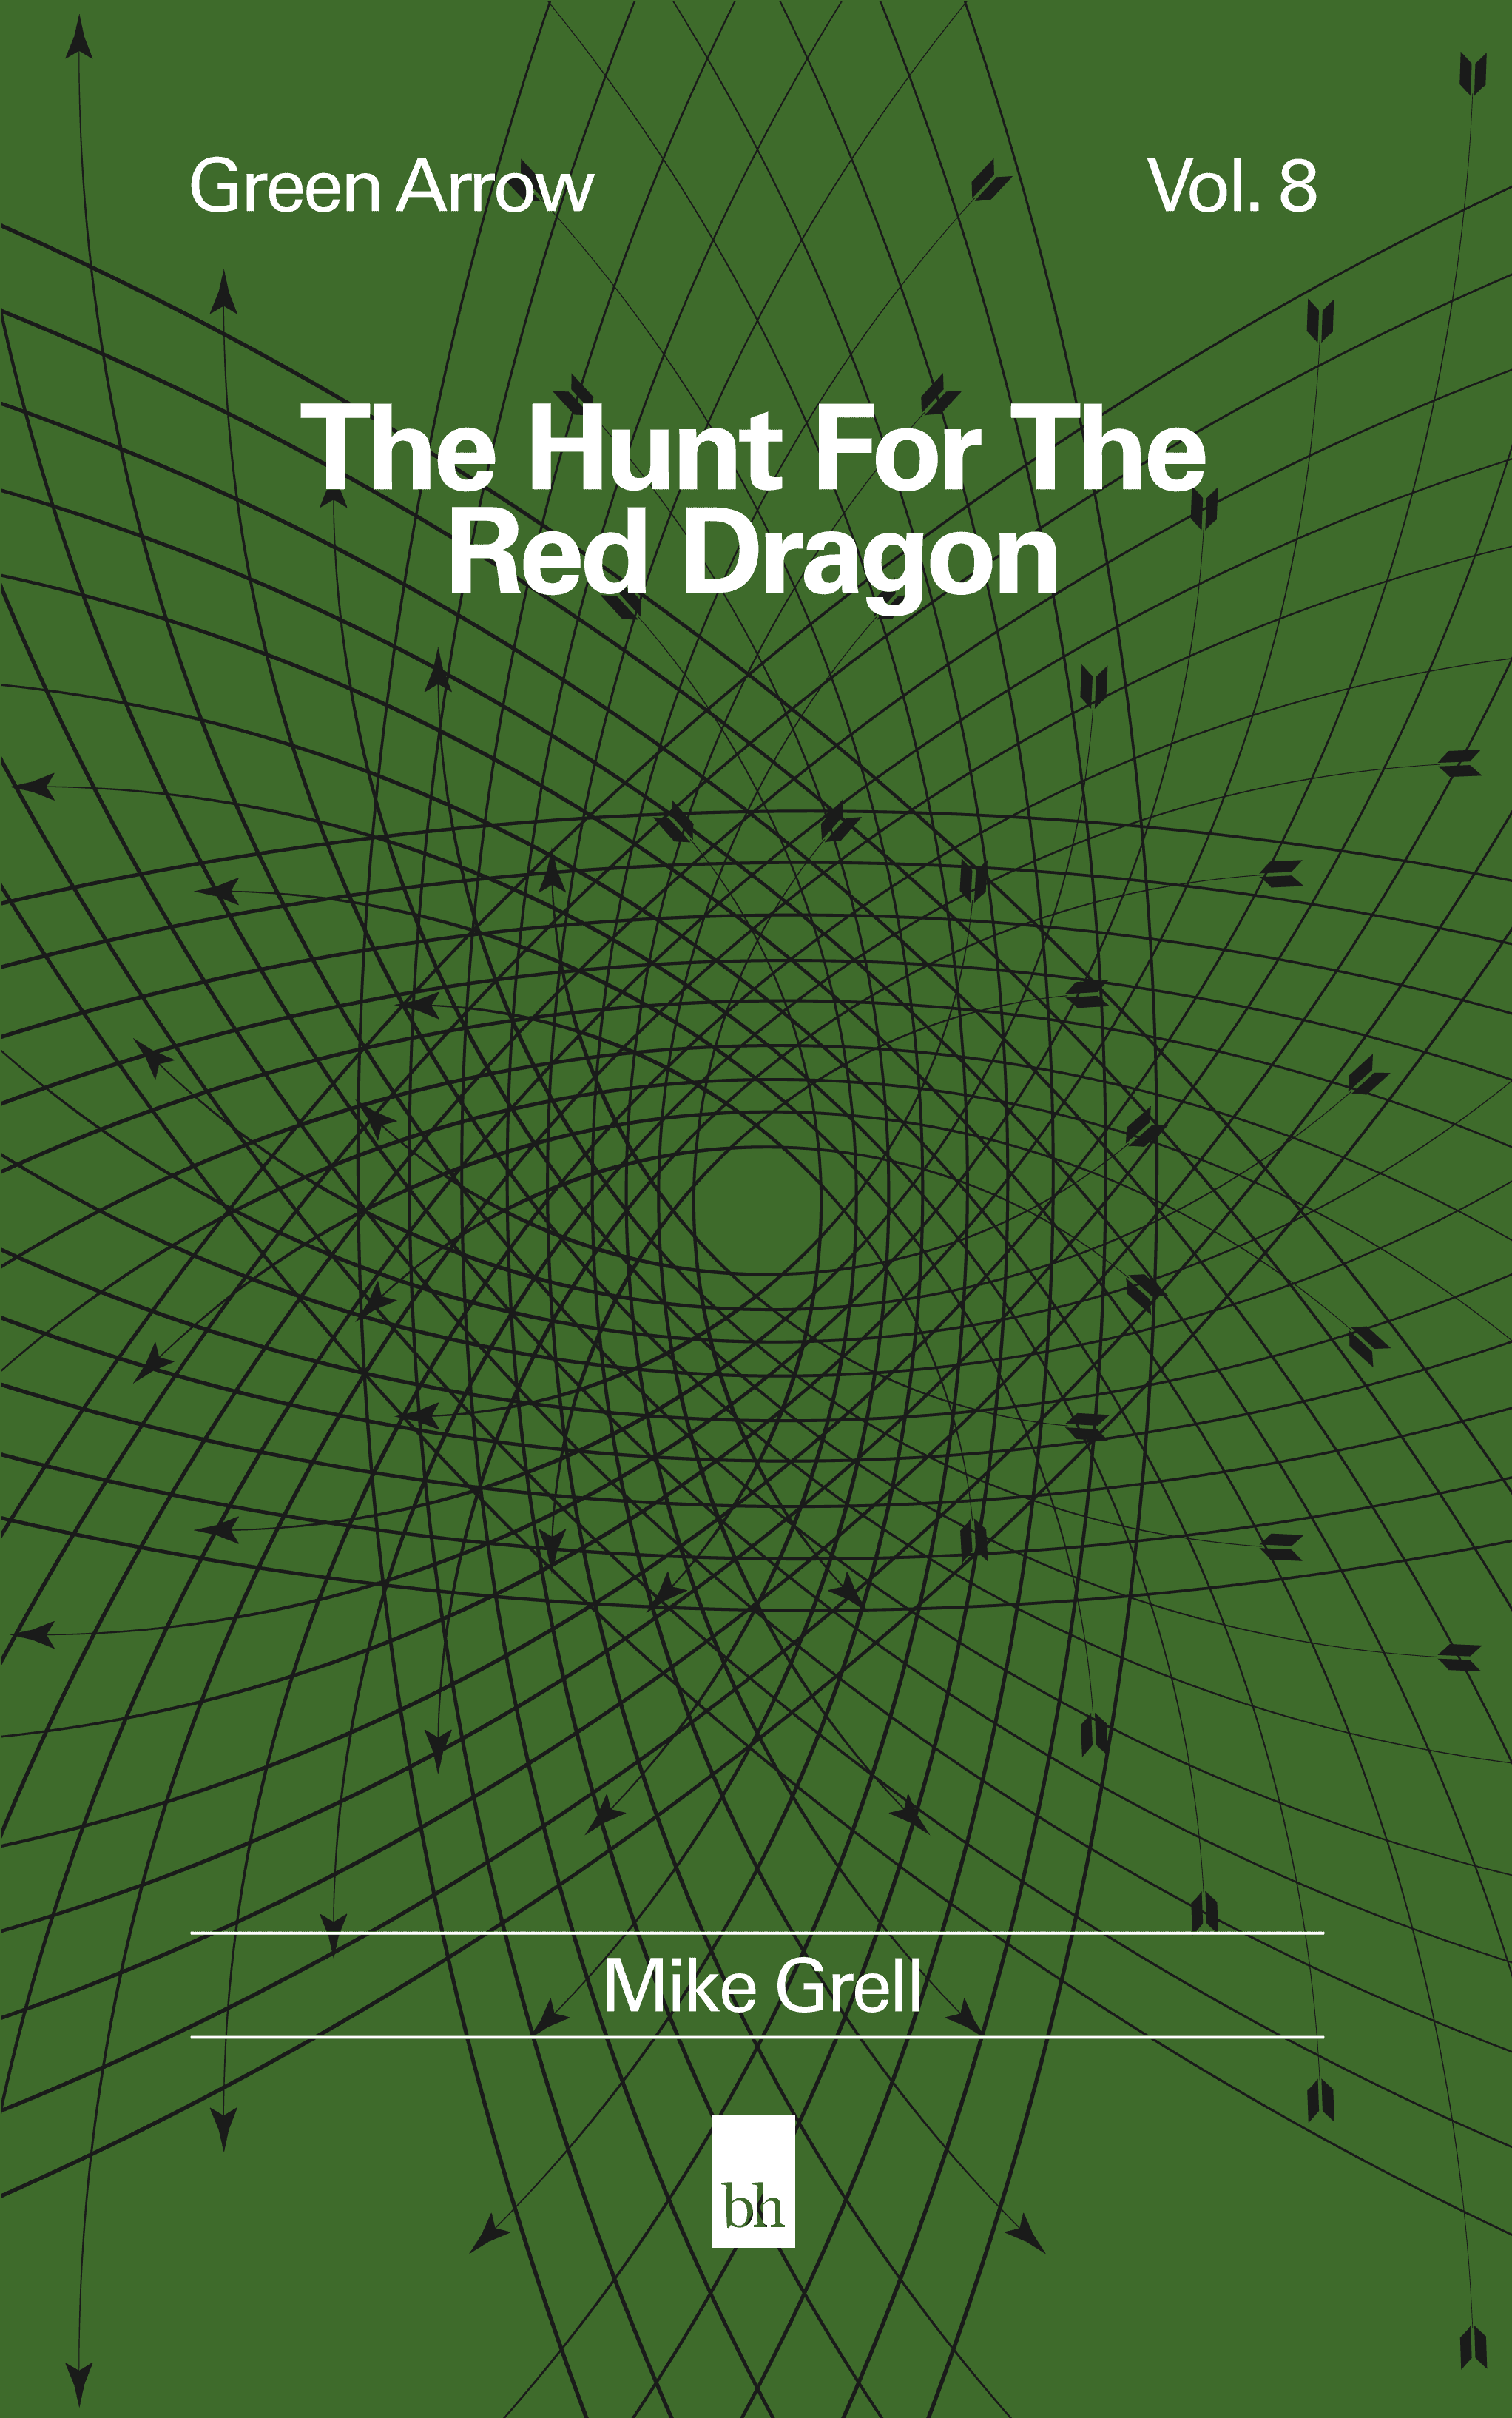 Book cover mock thumbnail for Green Arrow Vol. 8: The Hunt For The Red Dragon